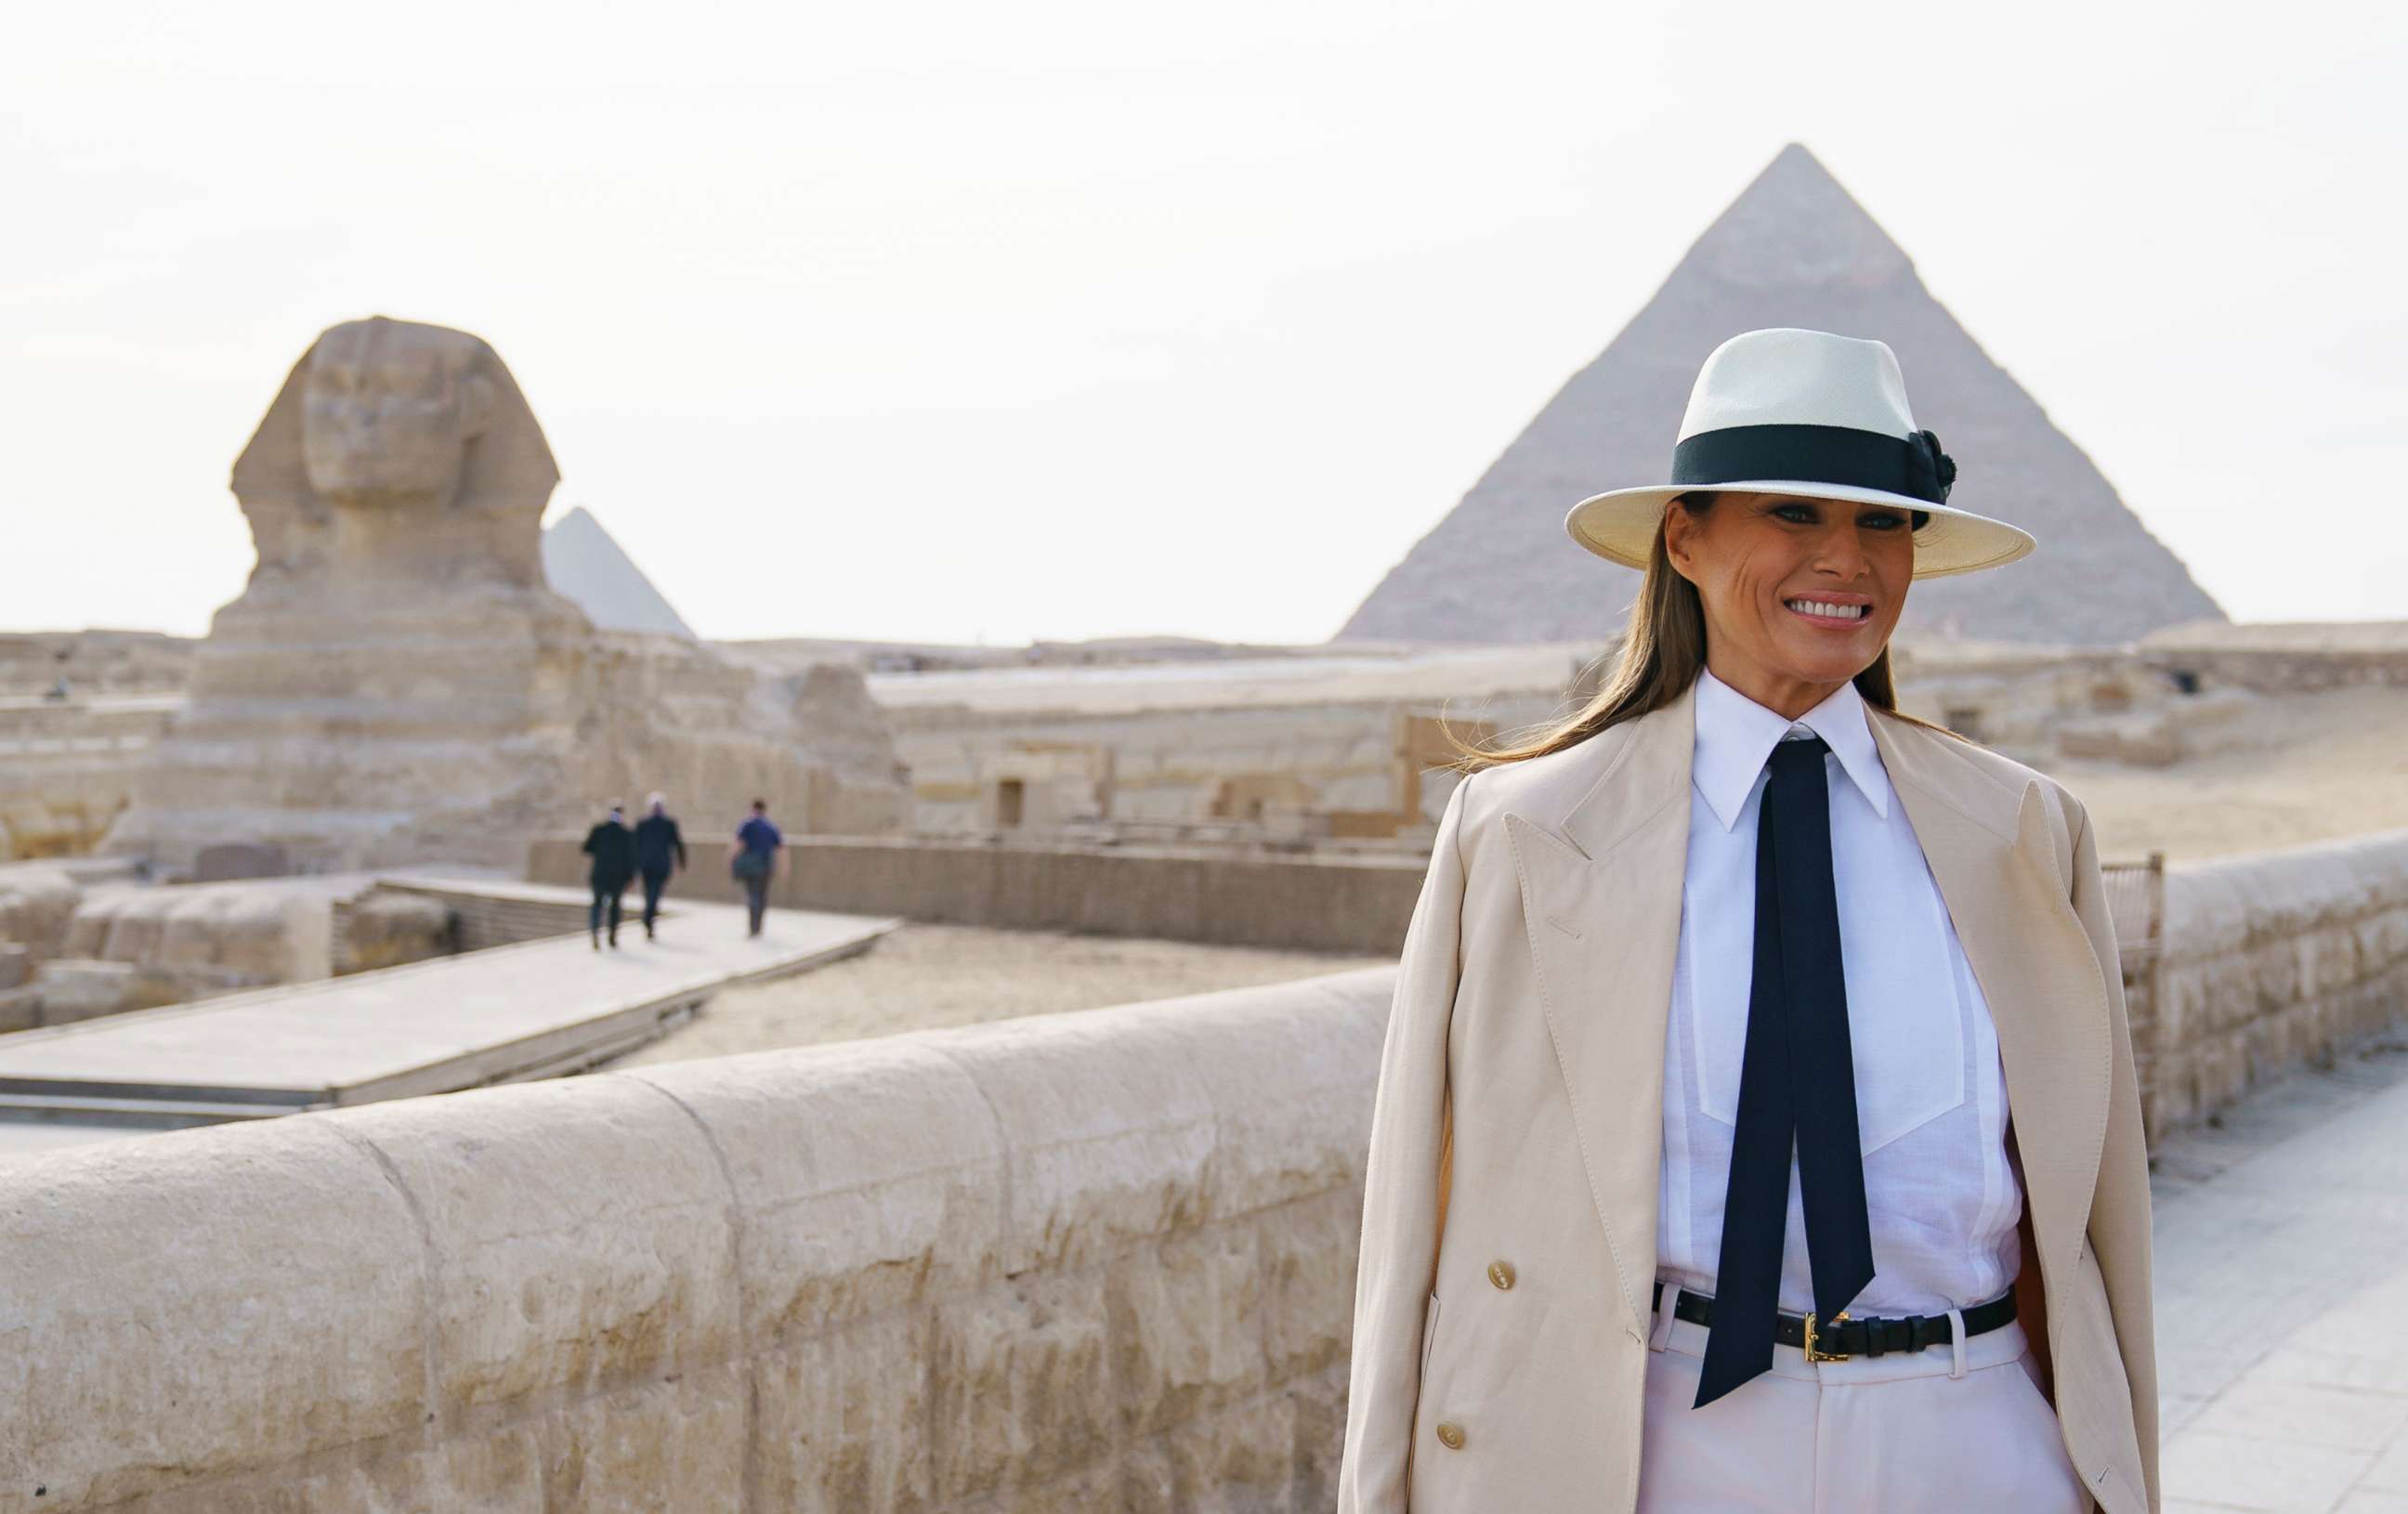 PHOTO: First lady Melania Trump visits the ancient statue of Sphinx, with the body of a lion and a human head, at the historic site of Giza Pyramids in Giza, near Cairo, Egypt, Oct. 6, 2018.